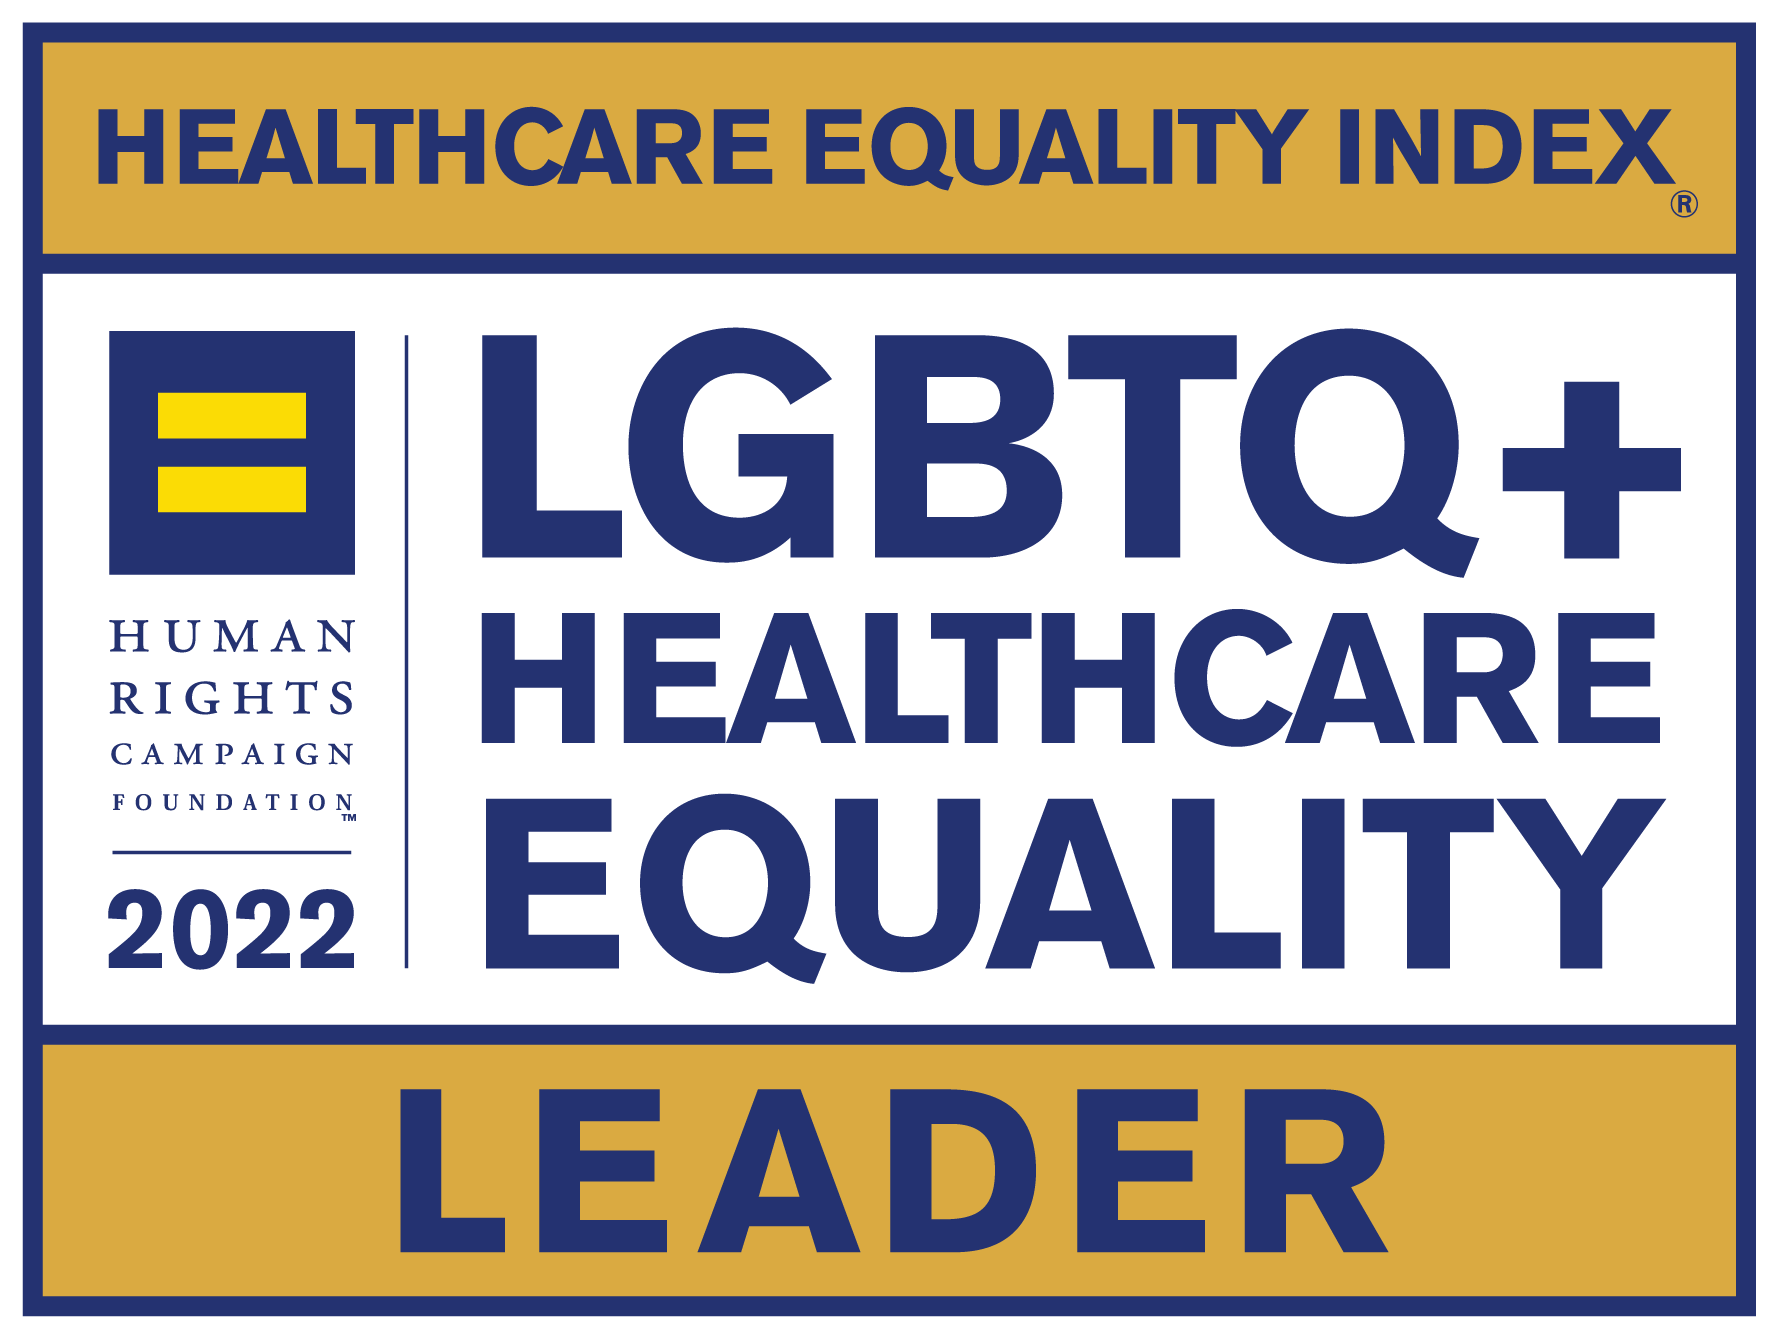 Healthcare Equality Index. LGBTQ+ Healthcare Equality Leader, 2022. Human rights campaign foundation.